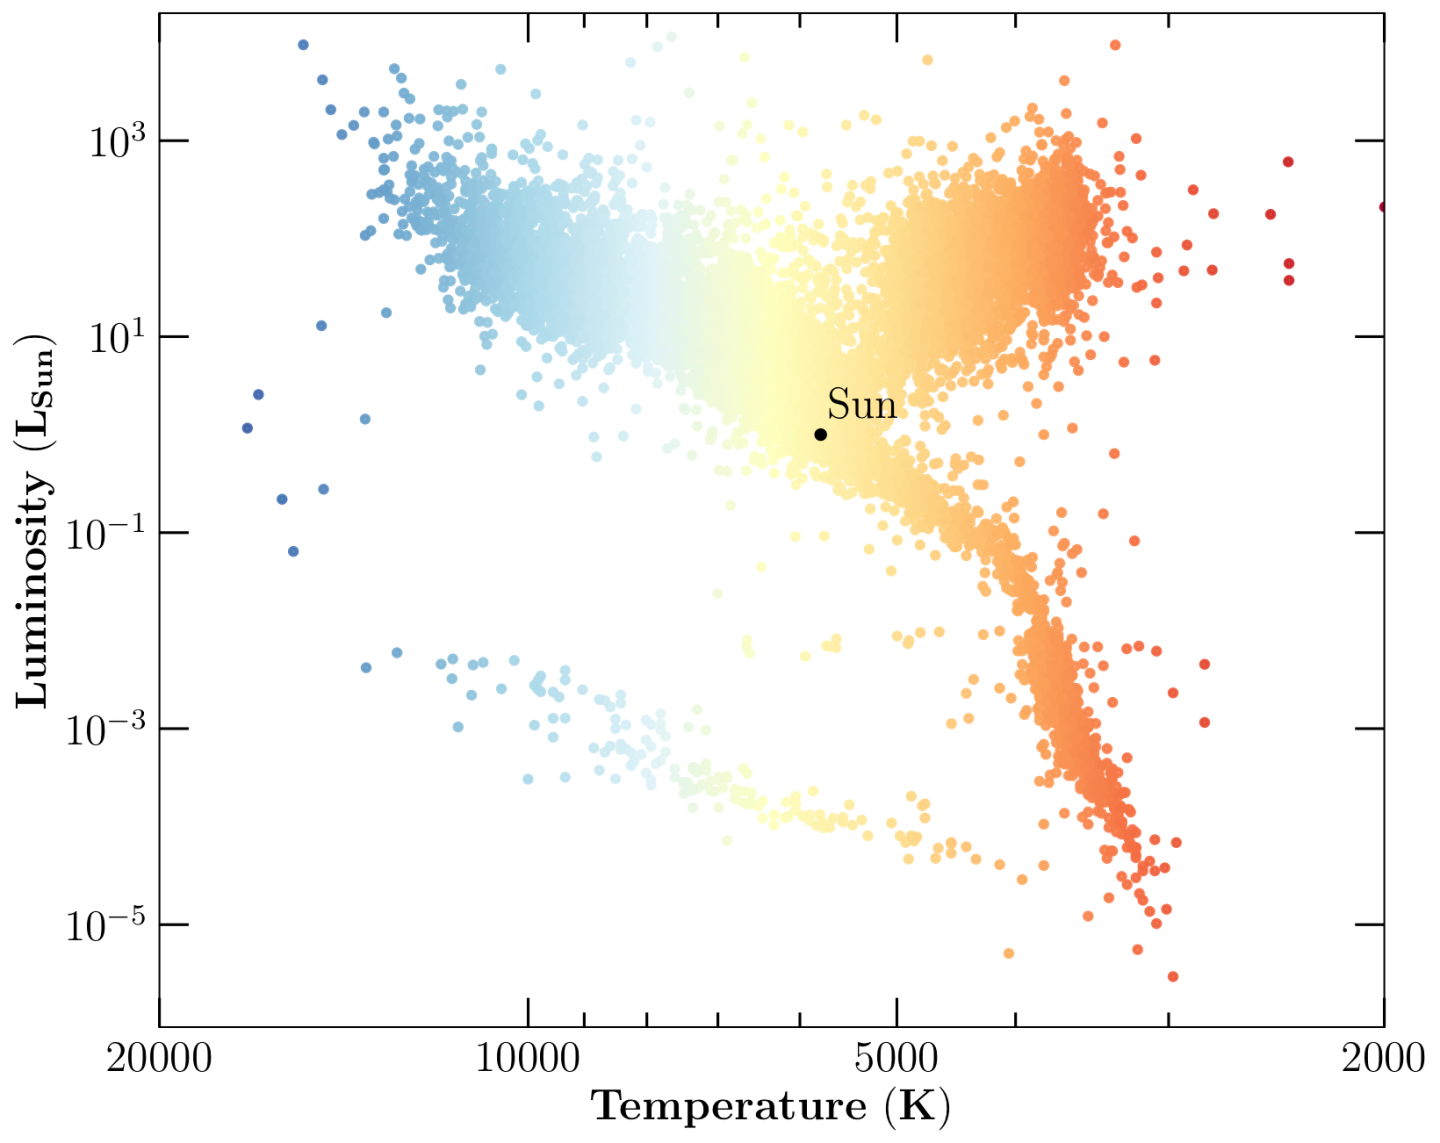 A graph showing temperature of stars vs their luminosity. Hundreds of data points are scattered across the graph, with one data point labelled as the Sun. 